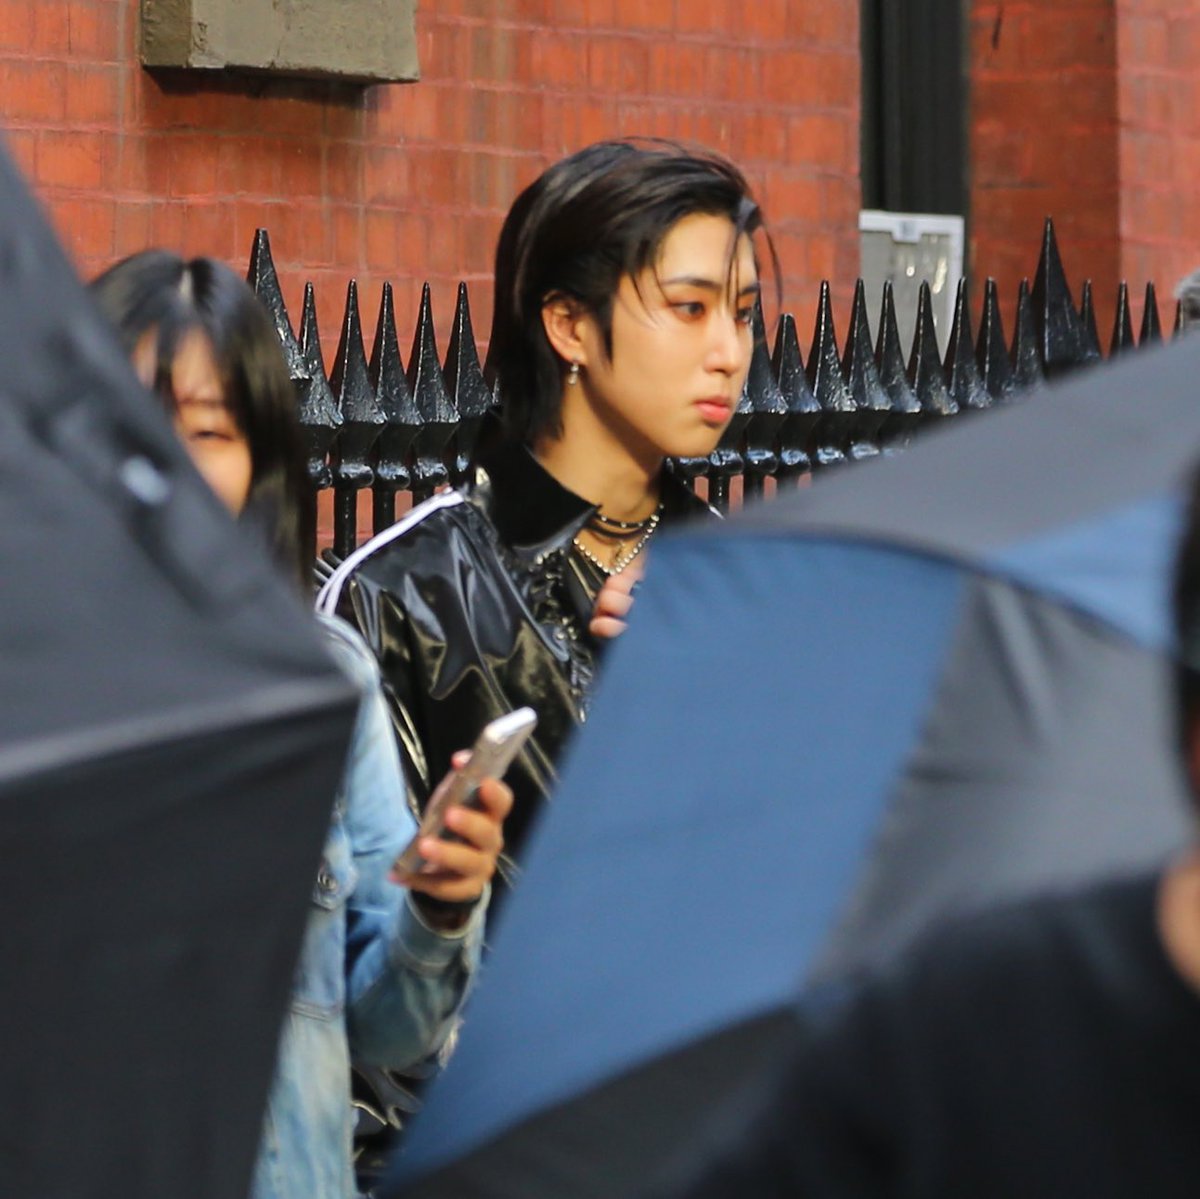 stray kids filming a music video in soho, new york!